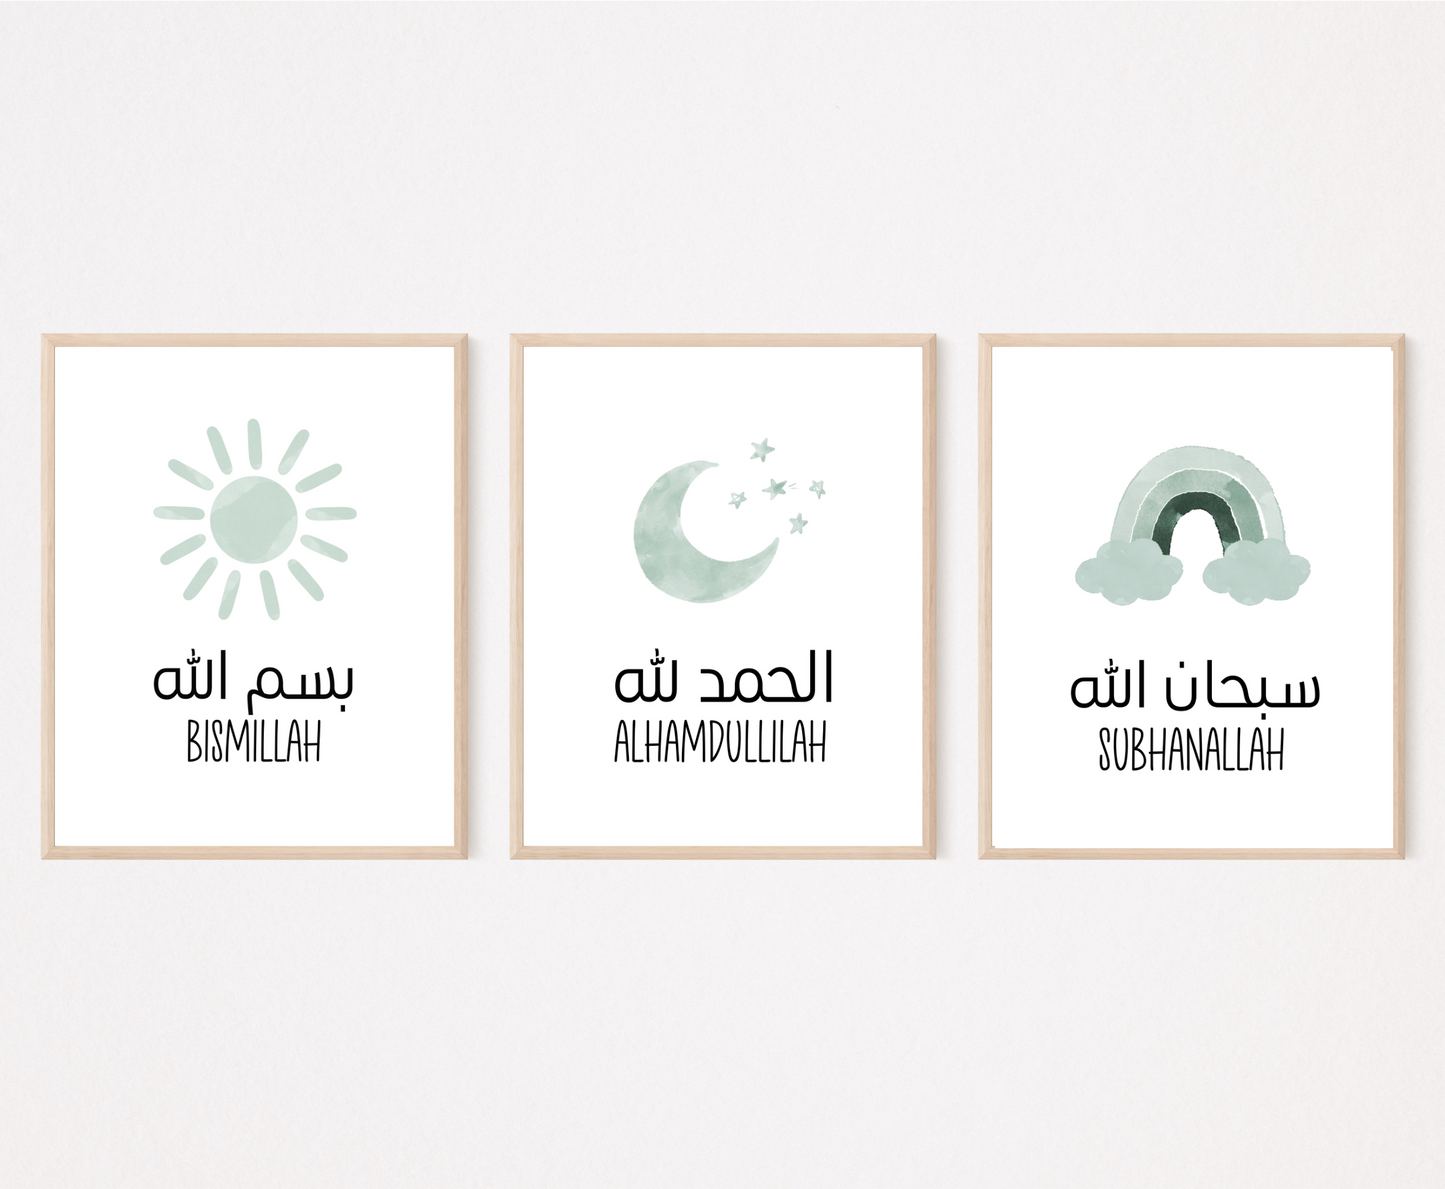 An image showing three digital print graphics. The first one is for a baby green sun with “Bismillah” written in both Arabic and English. The second one shows a graphic of a baby green crescent and some tiny stars with “Alhamdulillah” written in both Arabic and English right below. The last one is a baby green rainbow with “Subhanallah” in both Arabic and English written just below it. 